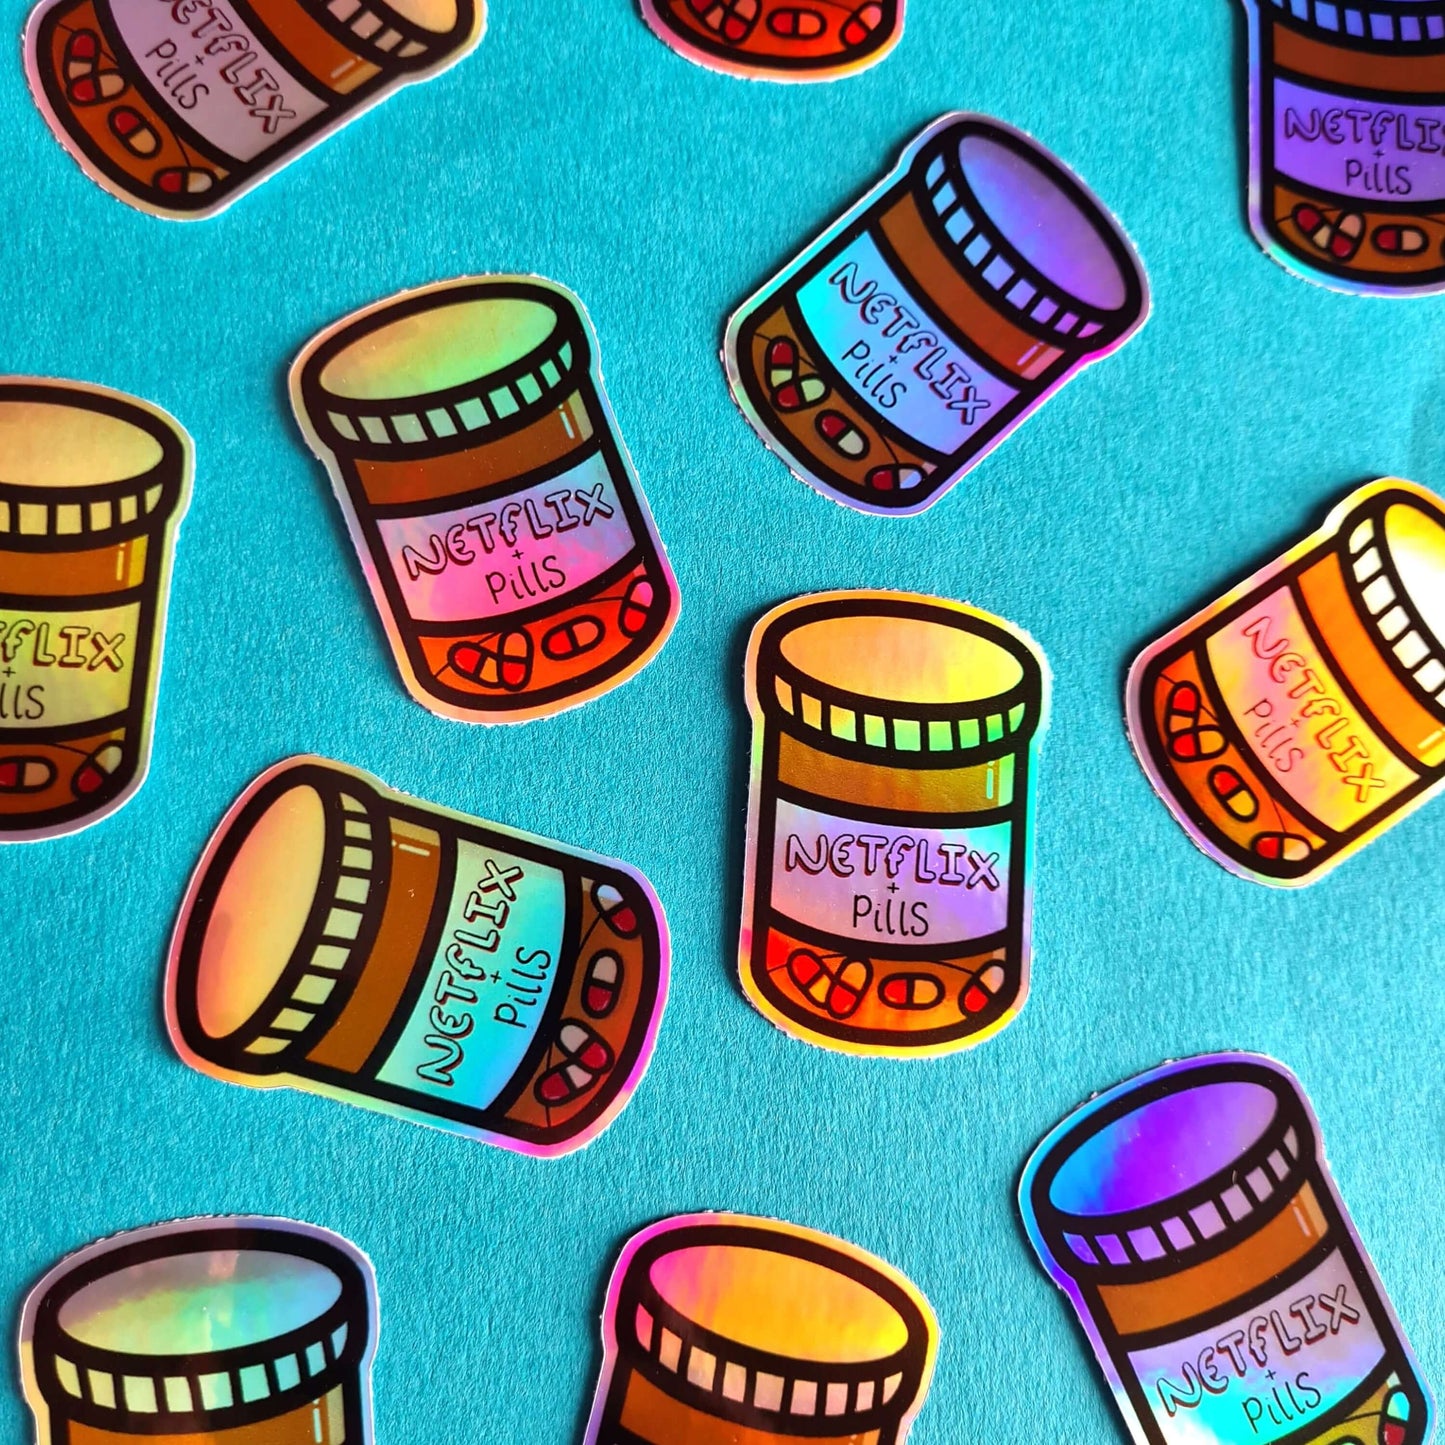 The Netflix & Pills Holographic Sticker on a blue background with multiple stickers of the same design. The holographic shiny rainbow pill bottle sticker filled with red and white tablets with a label that reads 'netflix + pills'. A cheeky hand drawn design to raise awareness for hidden disability prescriptions.